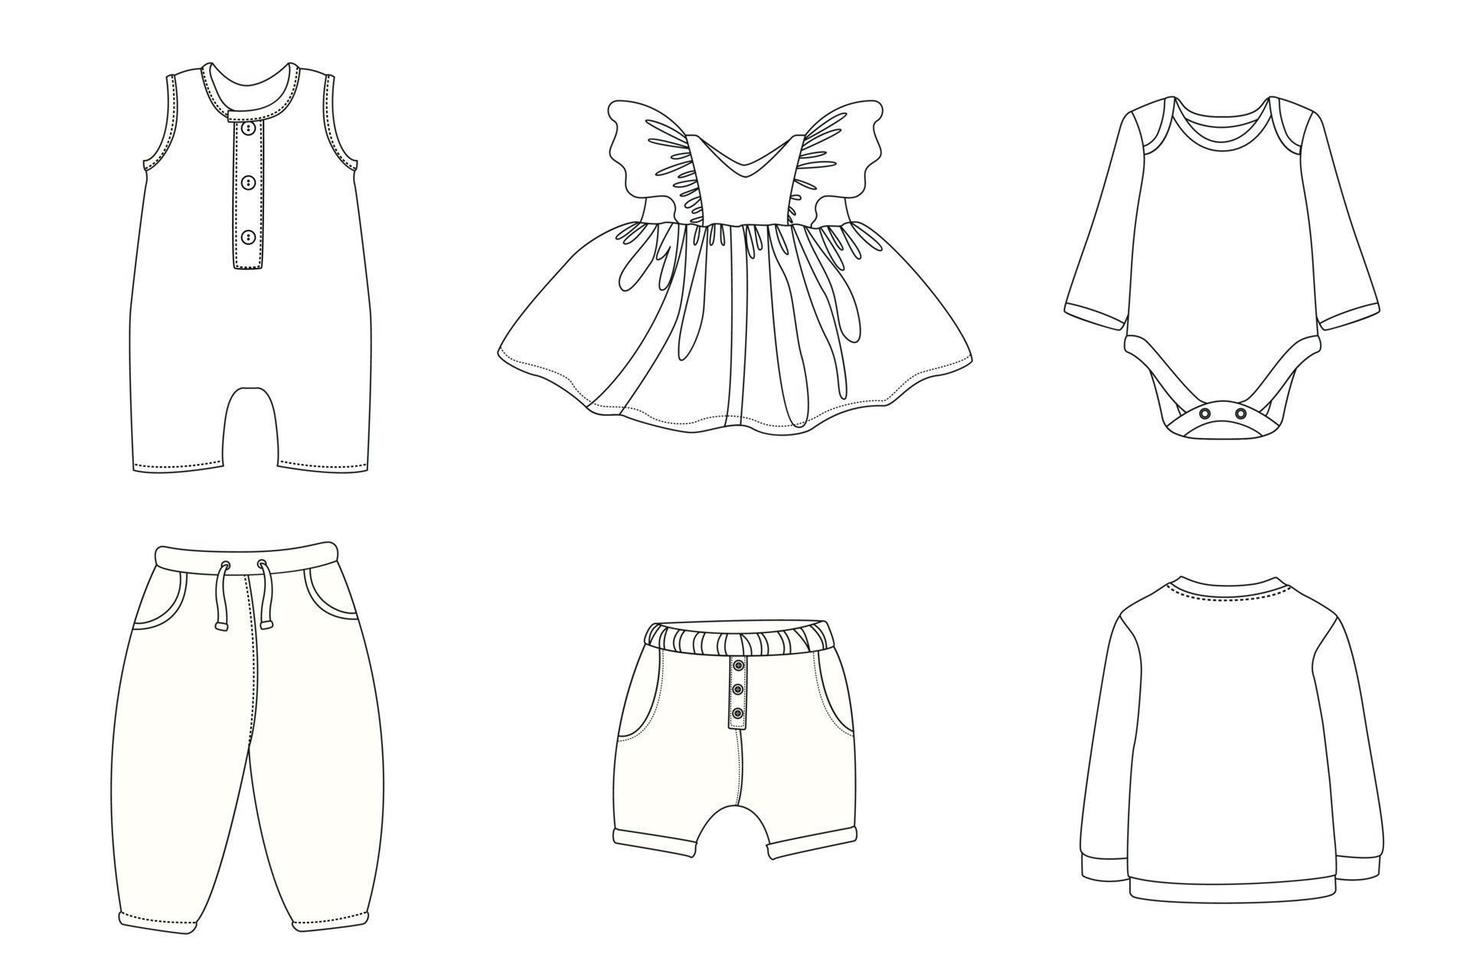 Set of children's clothes on a white background, vector mockups of children's clothes, dress for a girl, shorts for children, pants, overalls for a baby, bodysuit for a baby